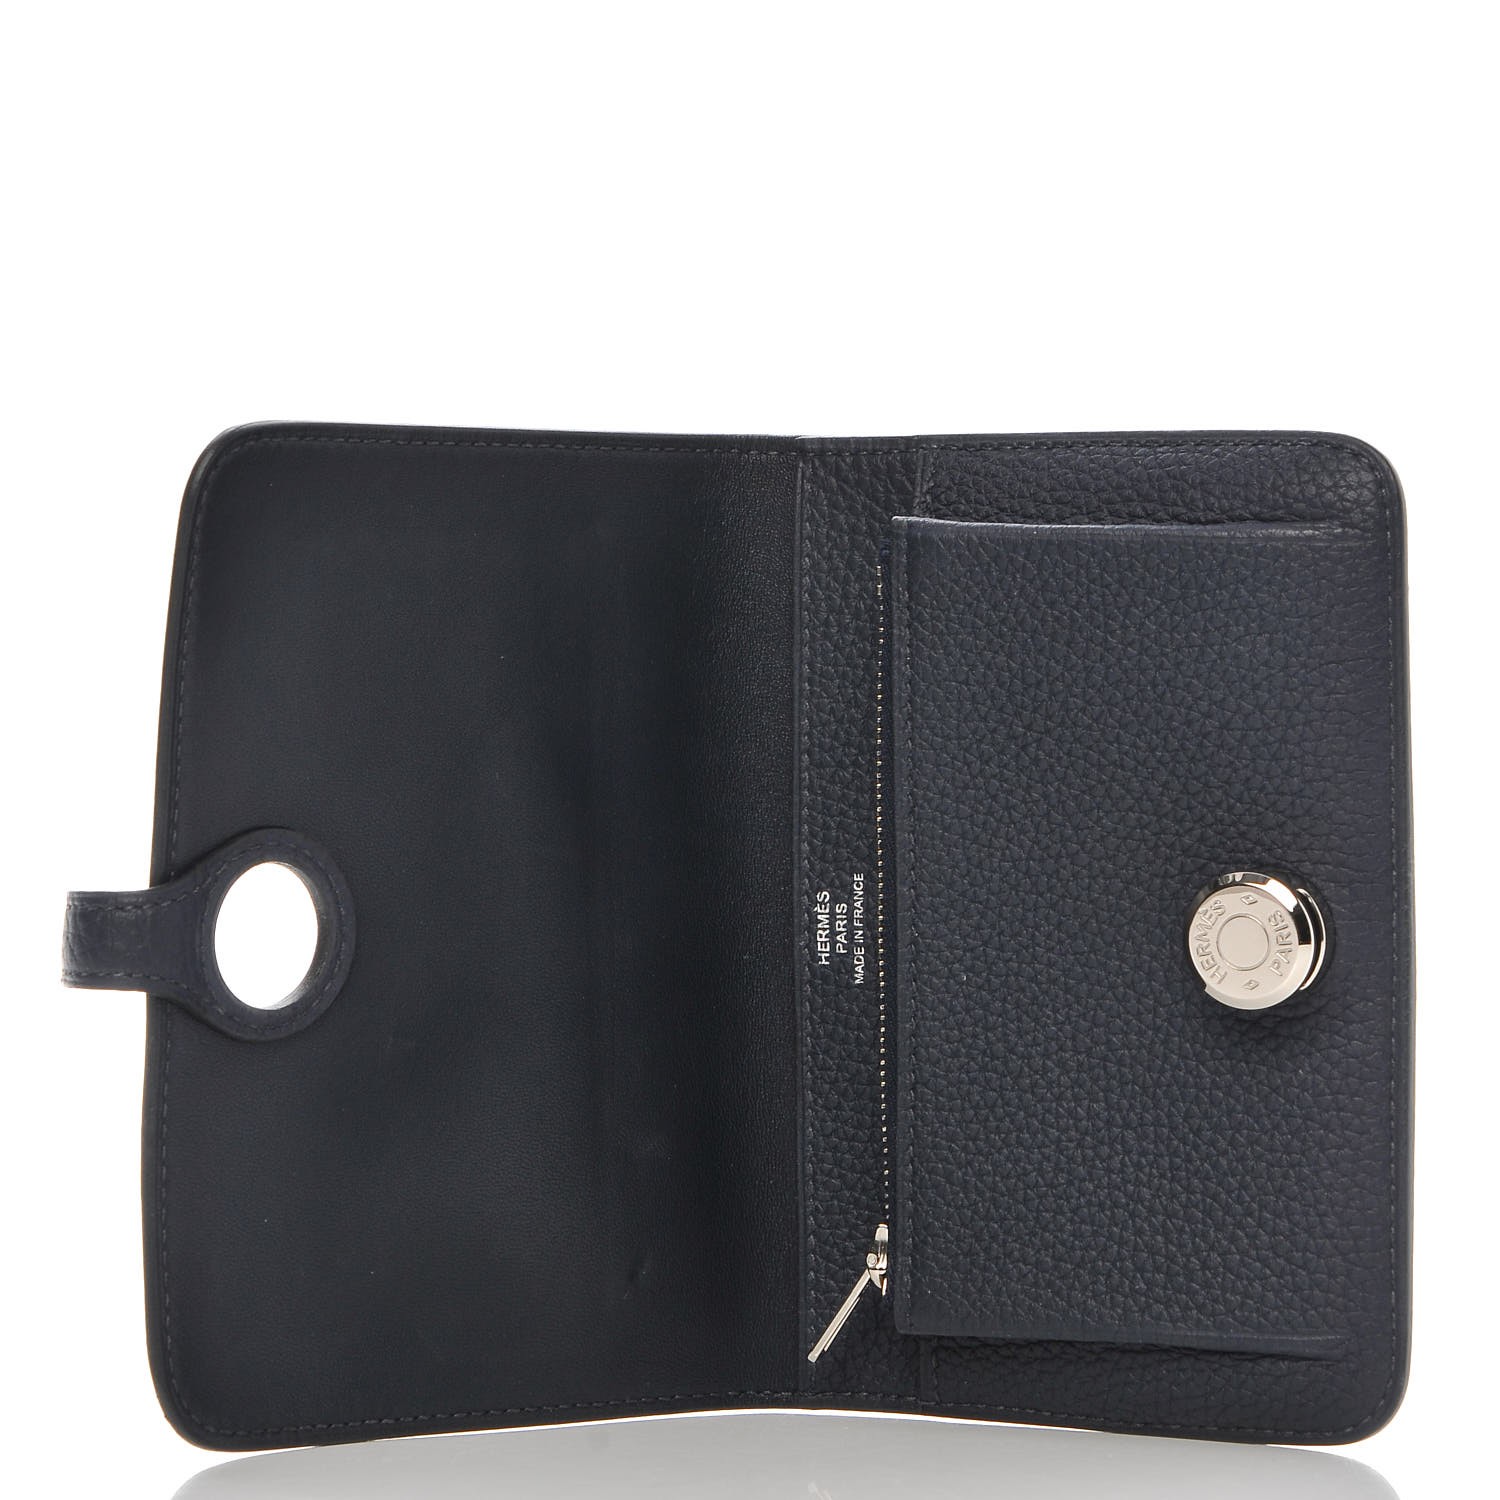 dogon compact wallet